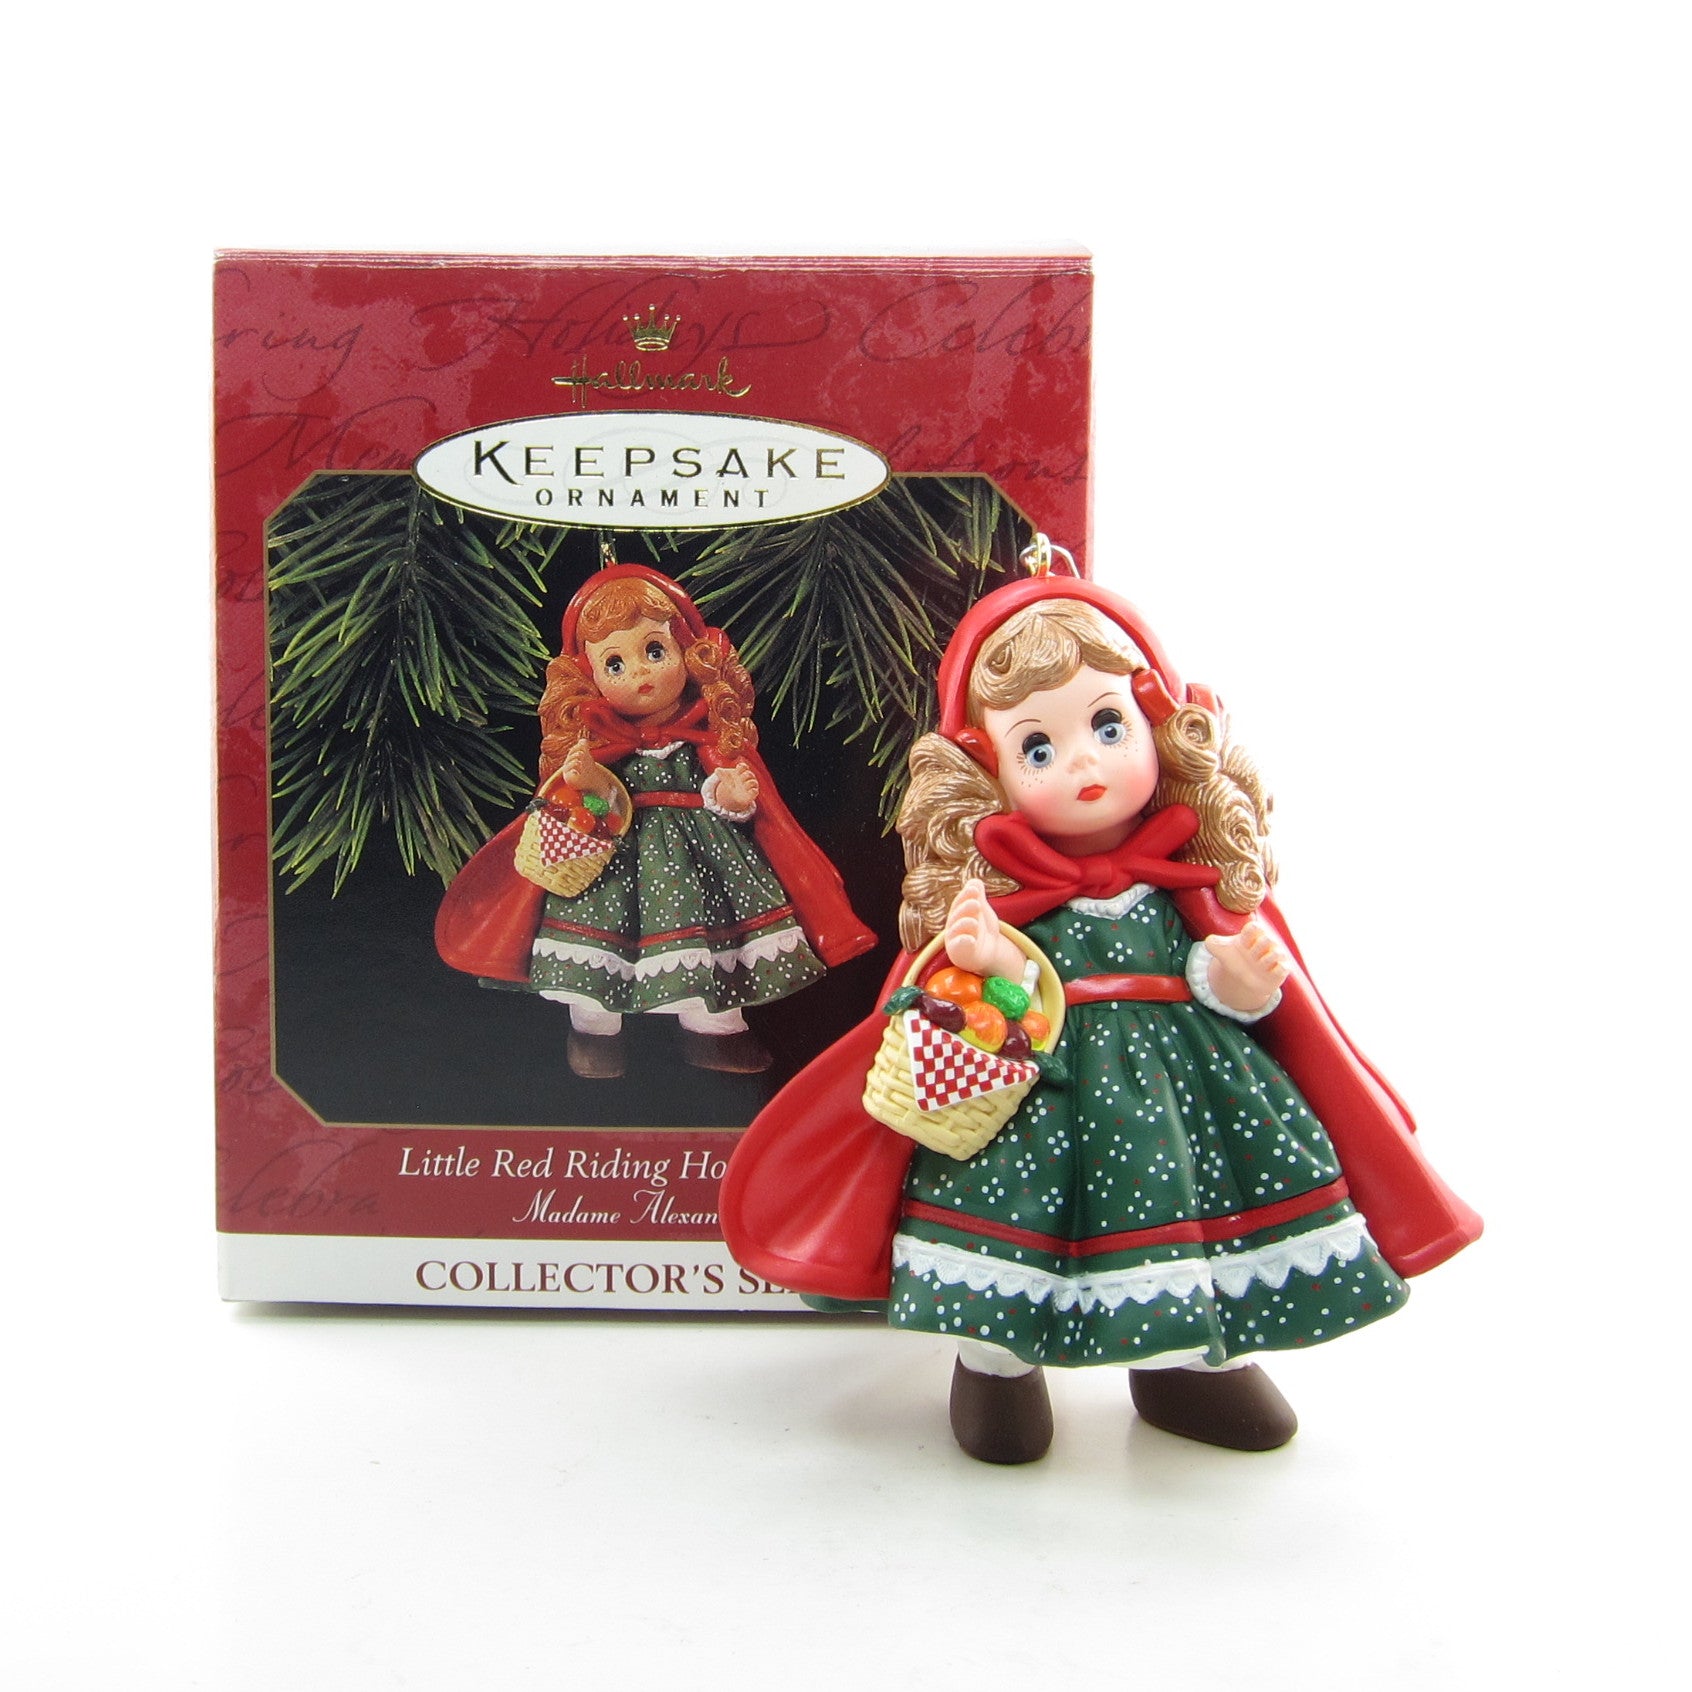 Little Red Riding Hood Madame Alexander doll ornament from 1997